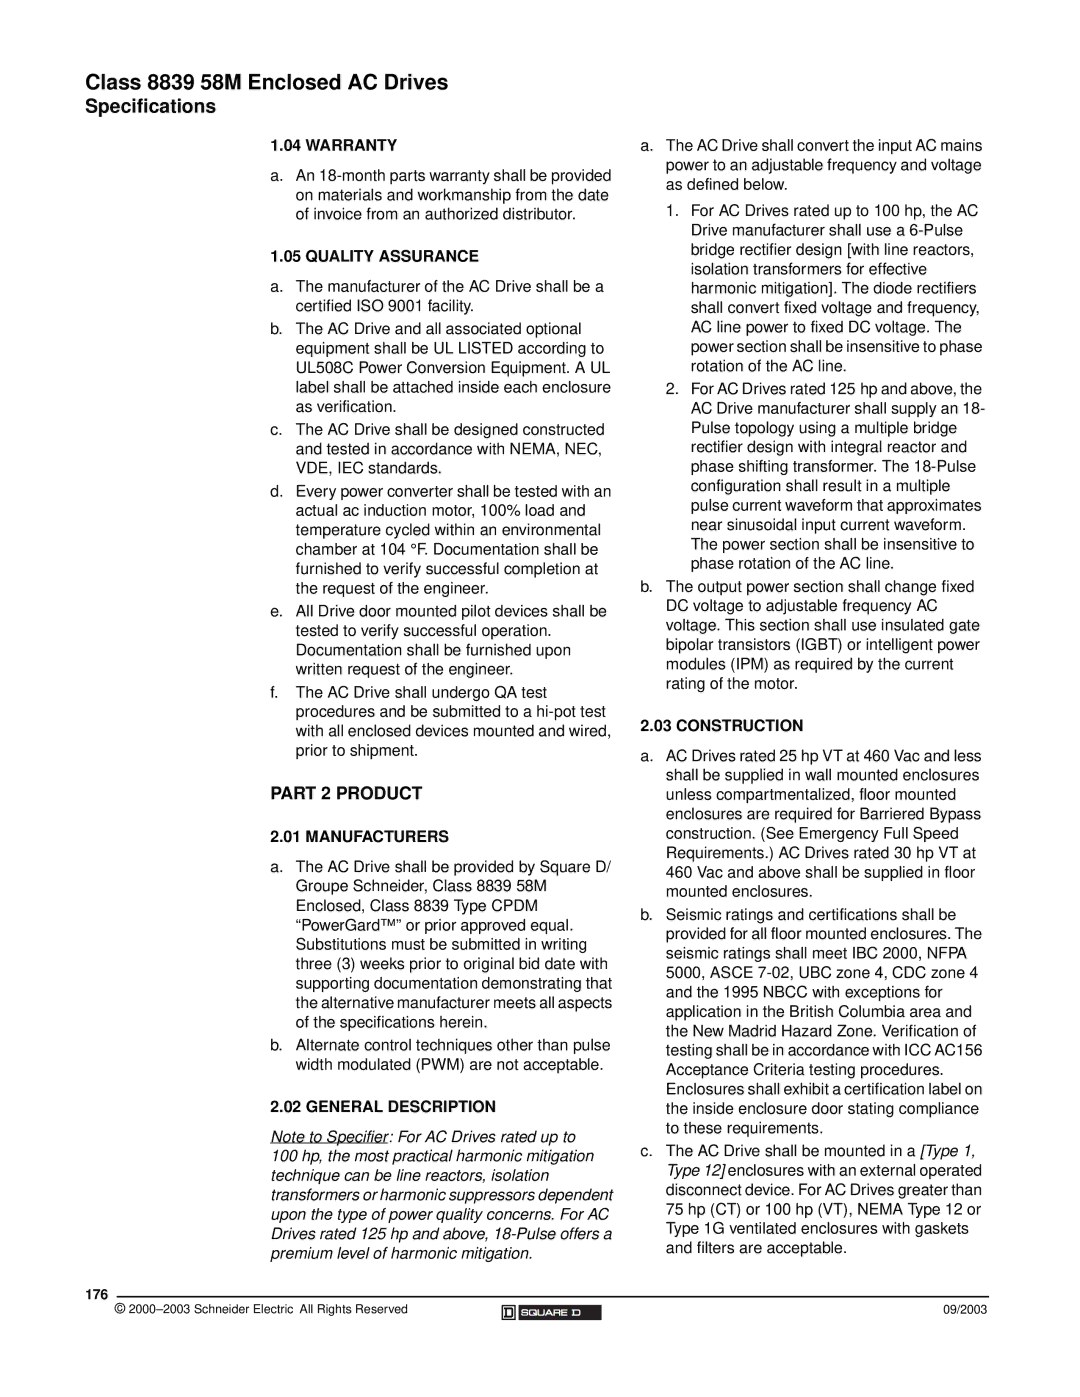 Schneider Electric 58 TRX manual Part 2 Product 